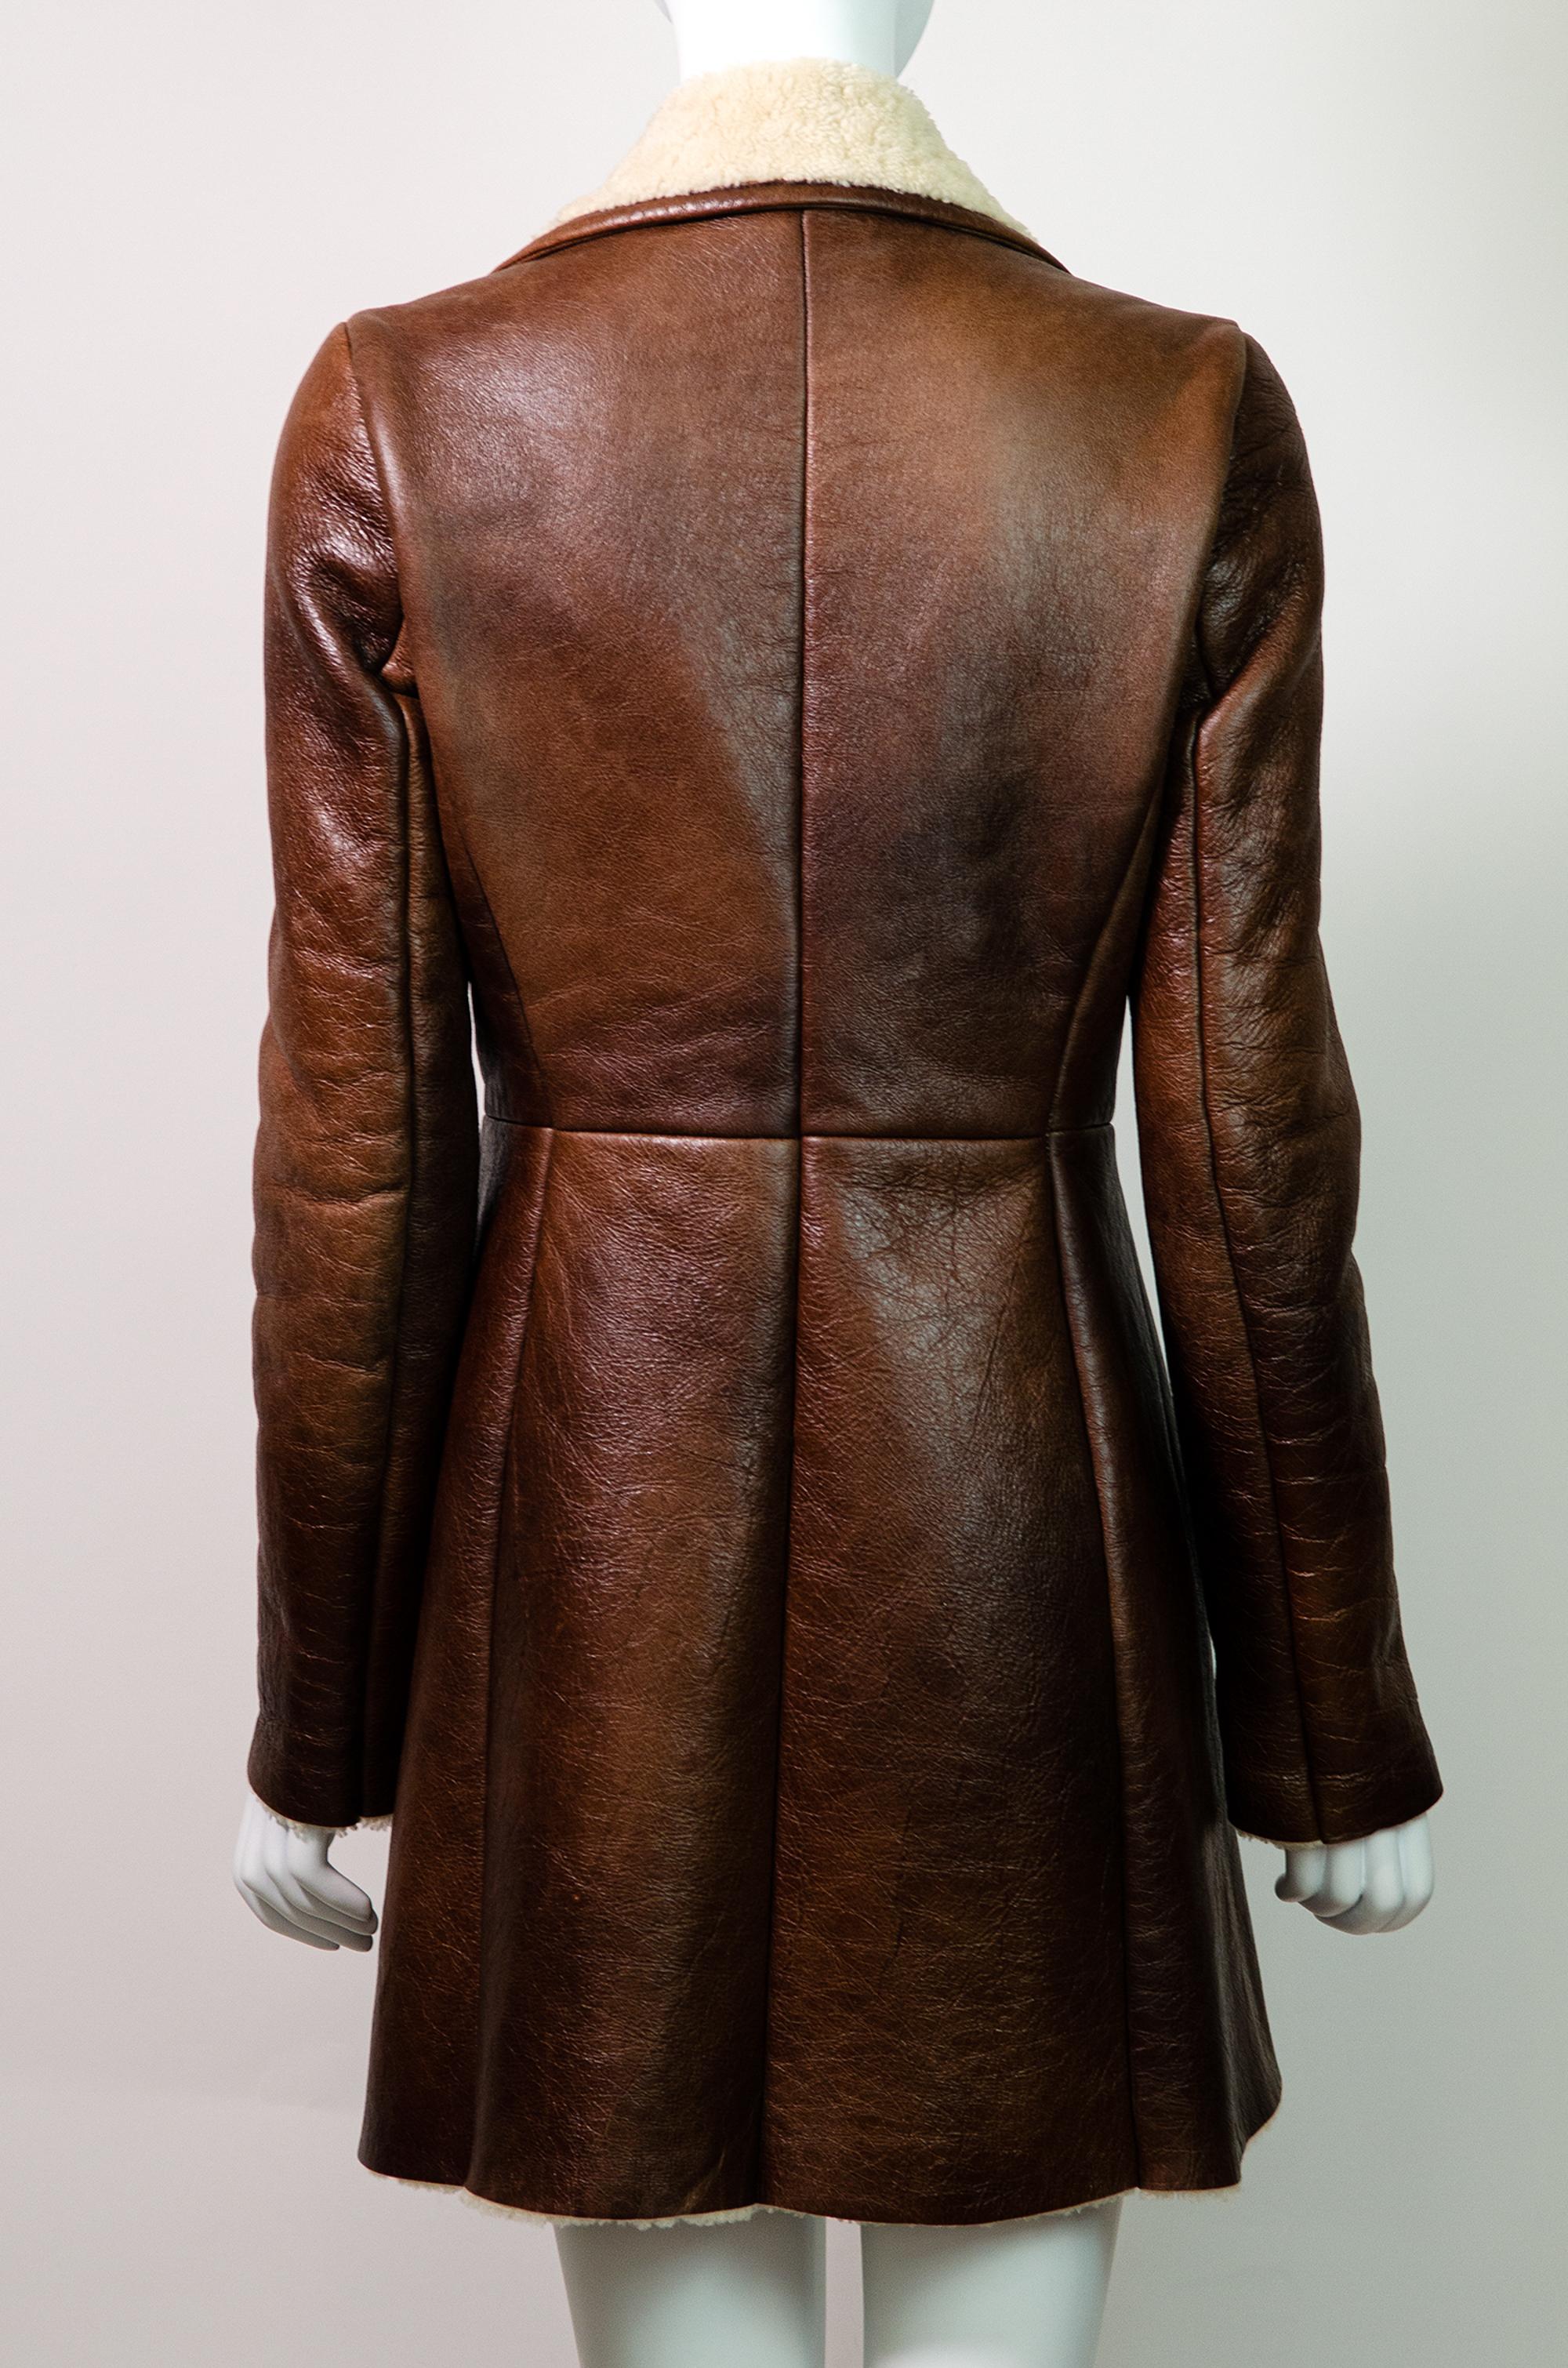 PRADA 2010 Shearling Double-breasted Brown Coat In Excellent Condition For Sale In Berlin, BE